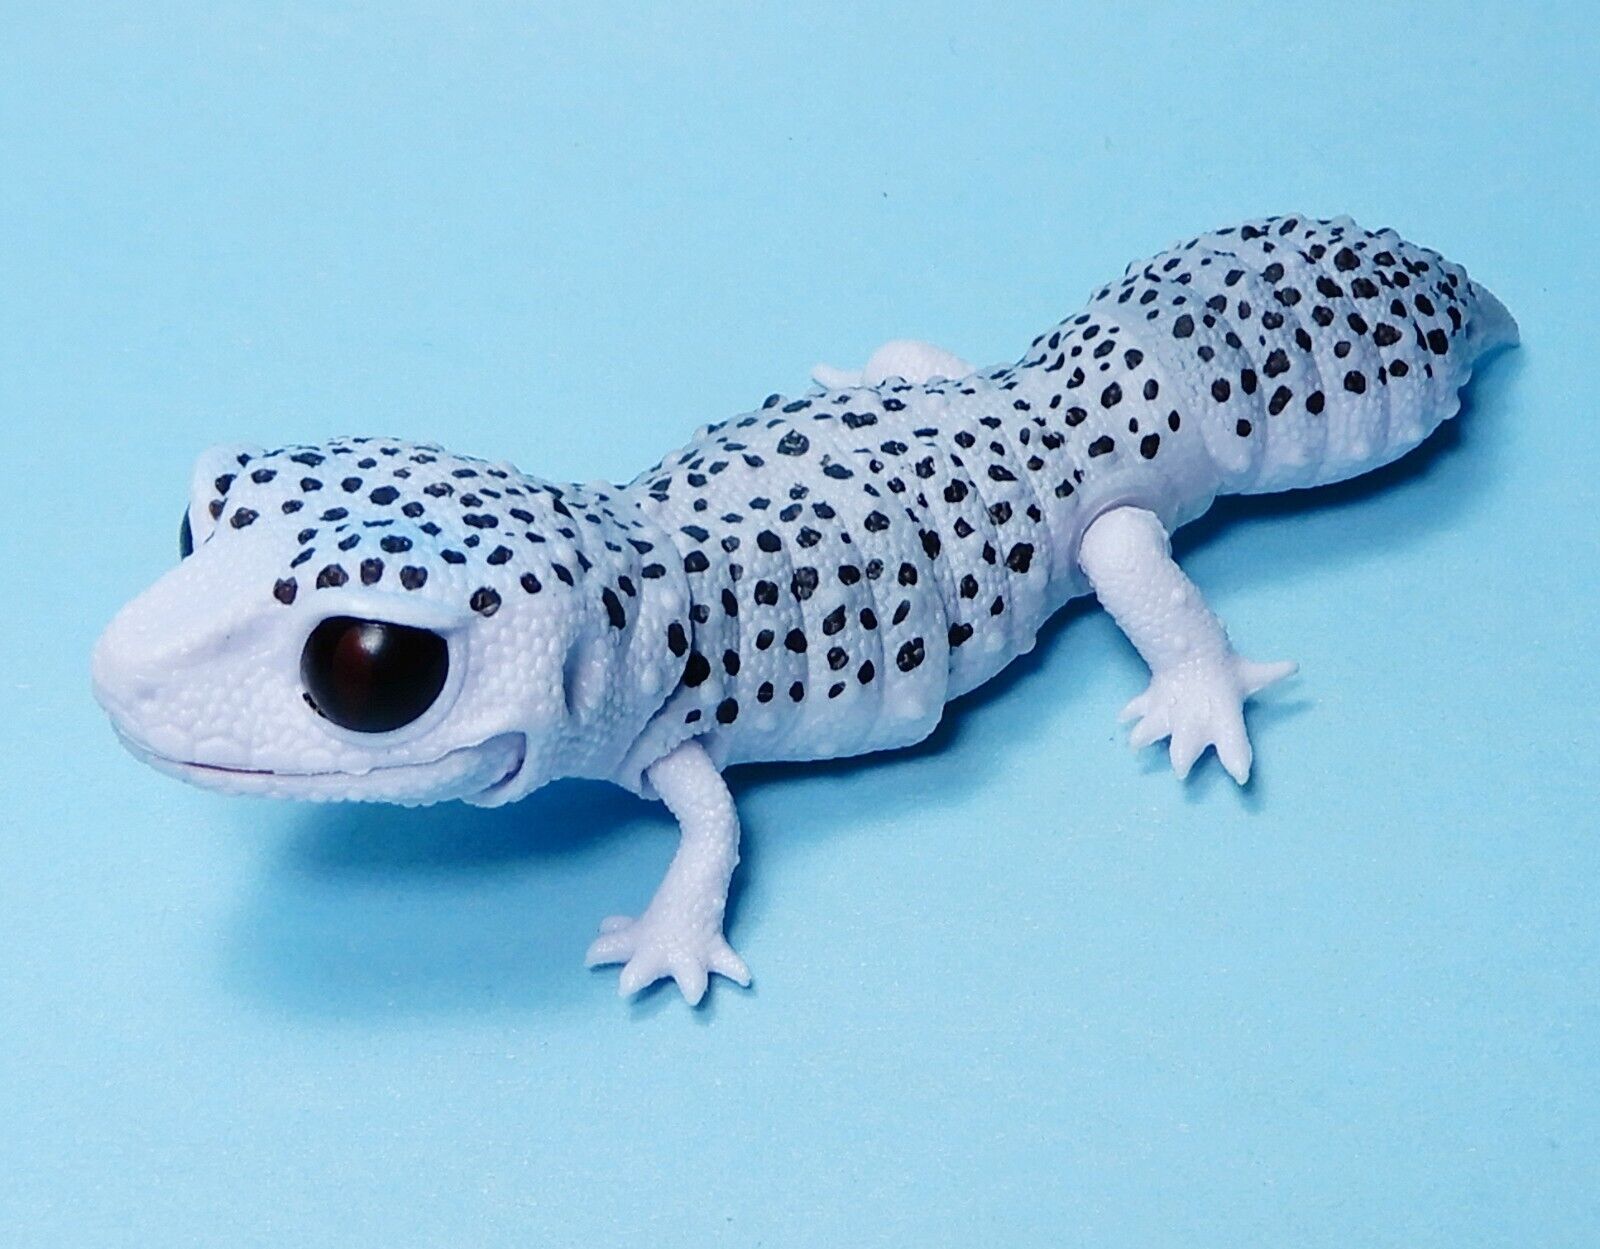 Bandai The Diversity of Life on Earth Leopard gecko Galaxy US seller figure new